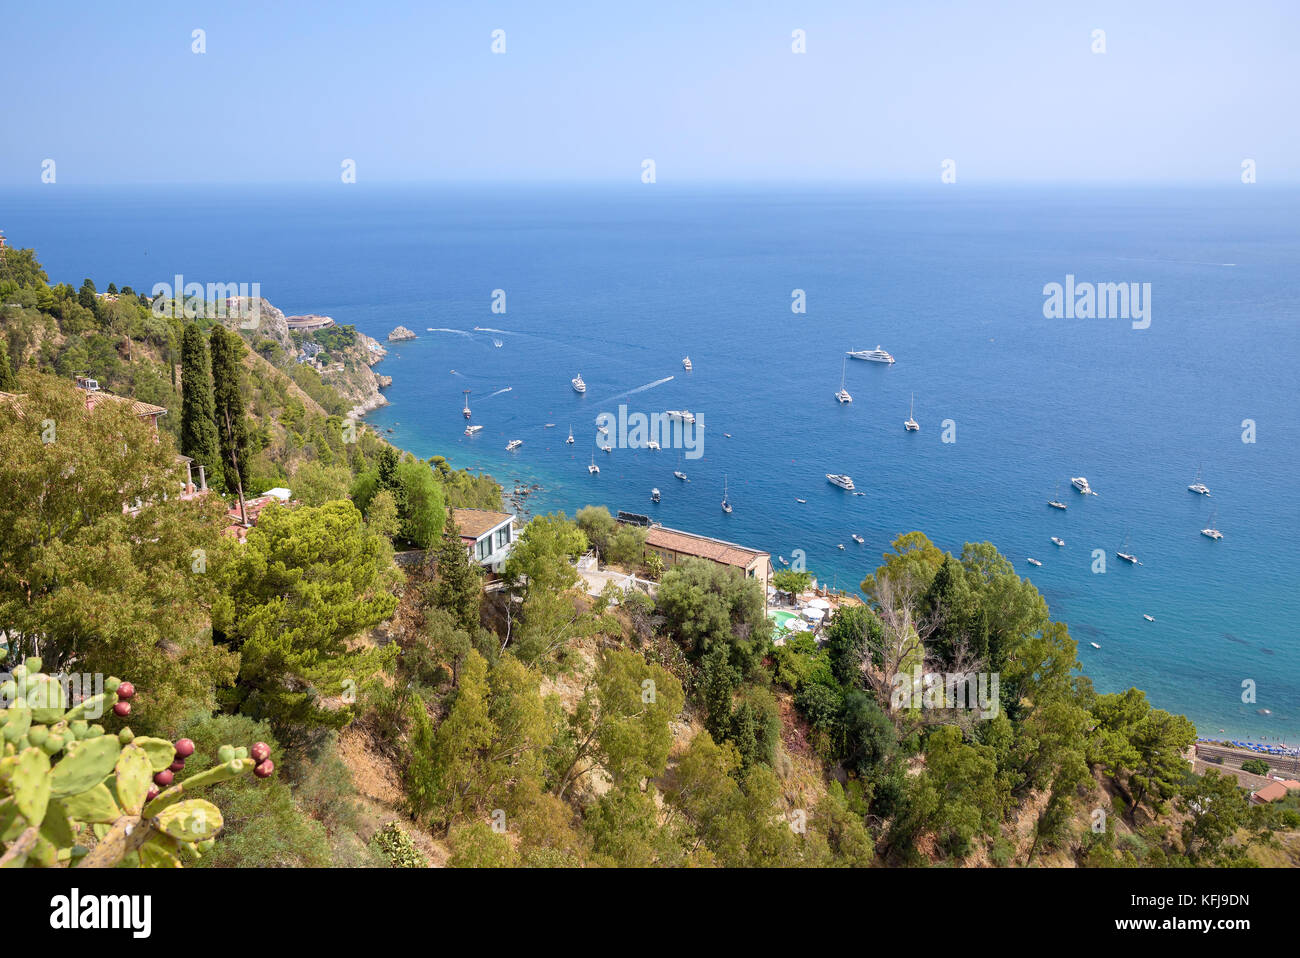 Aerial view of boats and yachts moored at the Sicilian coast Stock Photo